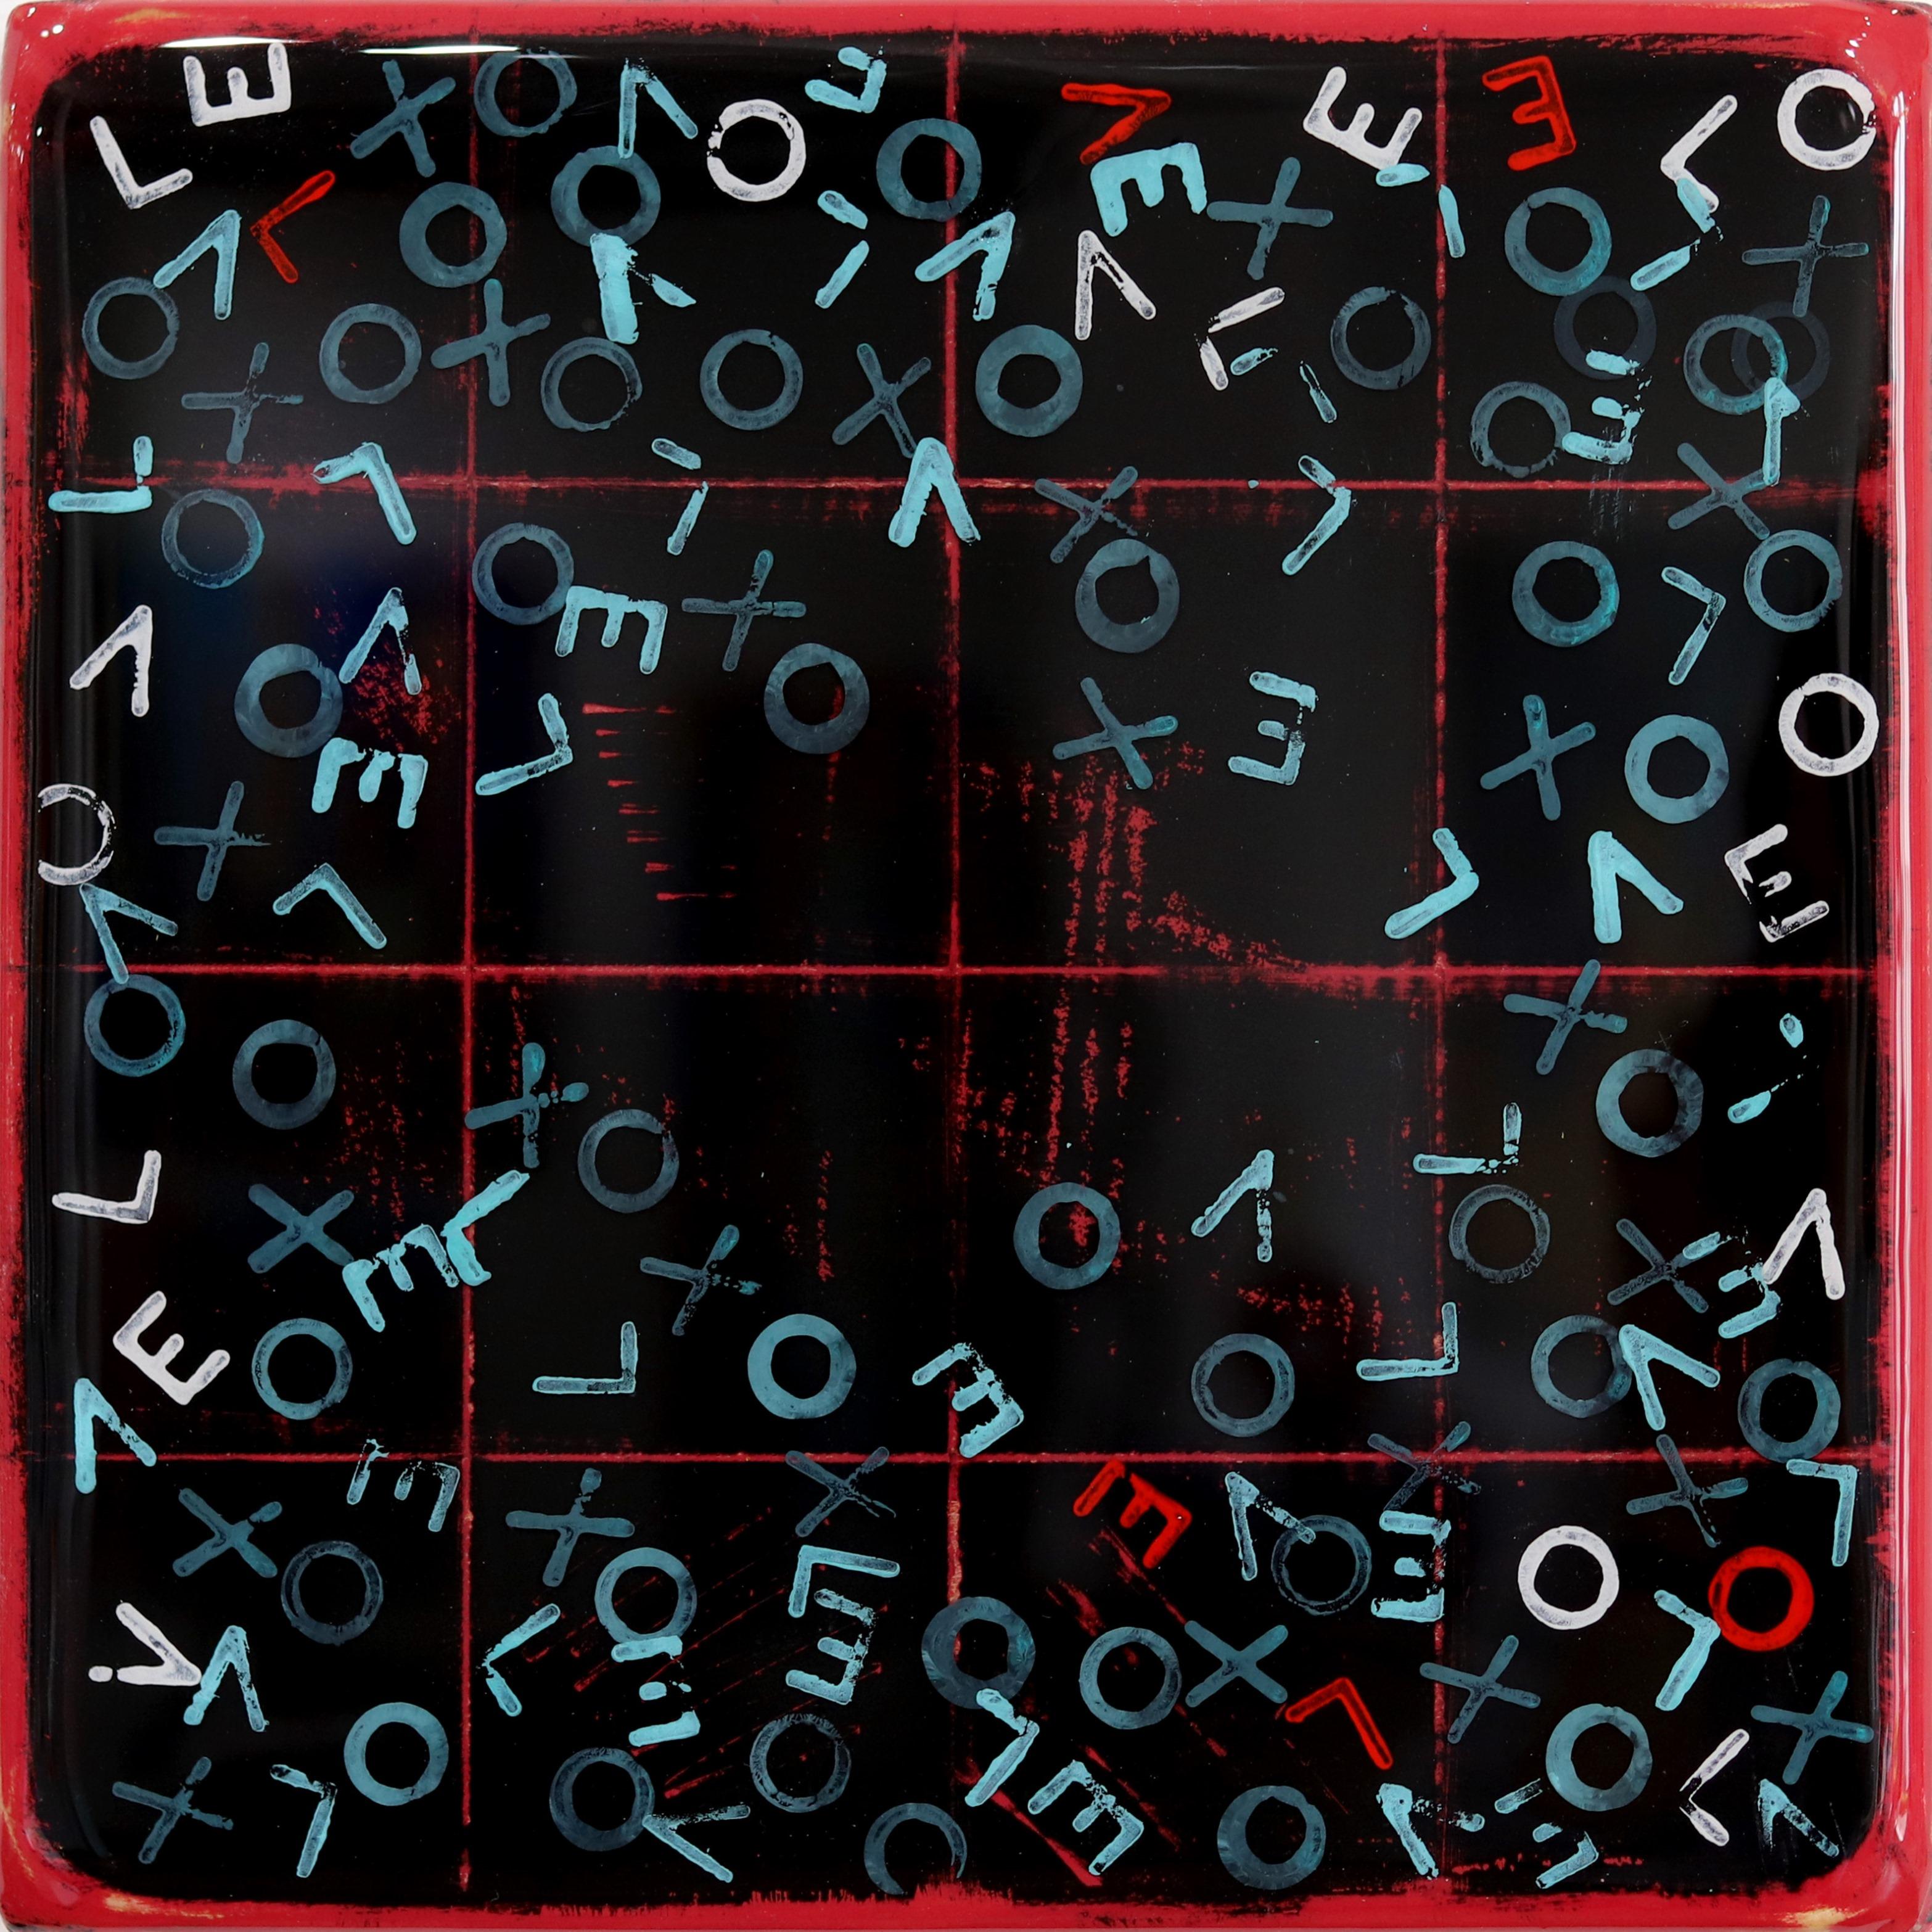 Love Letters 12 - Vibrant Acrylic Black Red Blue Lettered Resin Artwork - Mixed Media Art by Ricky Hunt